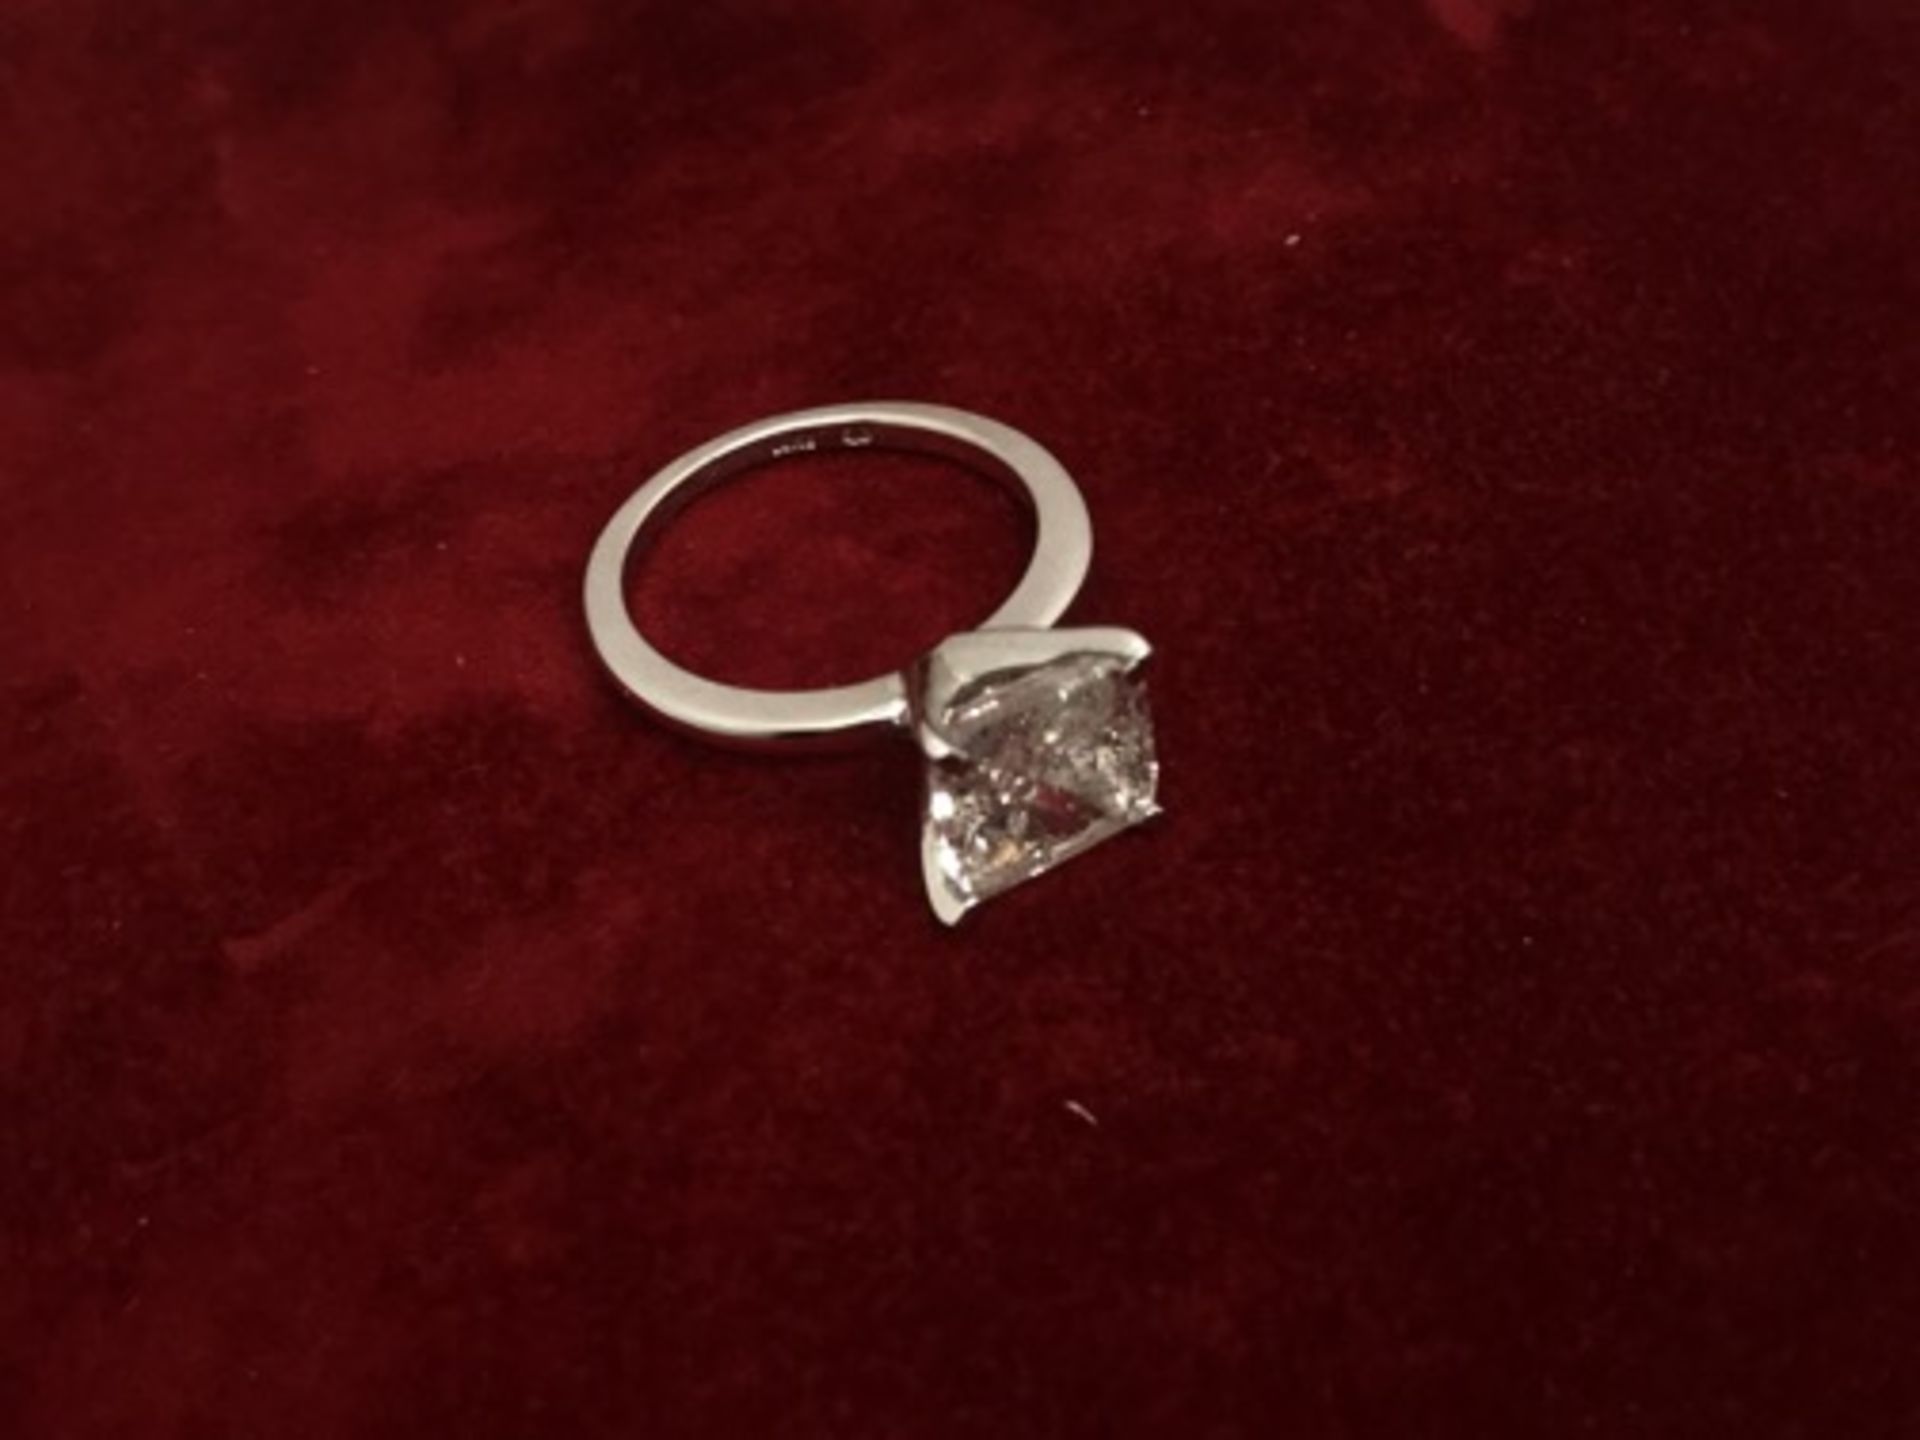 4.00ct PRINCESS CUT DIAMOND SOLITAIRE RING SET IN WHITE METAL TESTED AS 14ct GOLD - Image 3 of 3